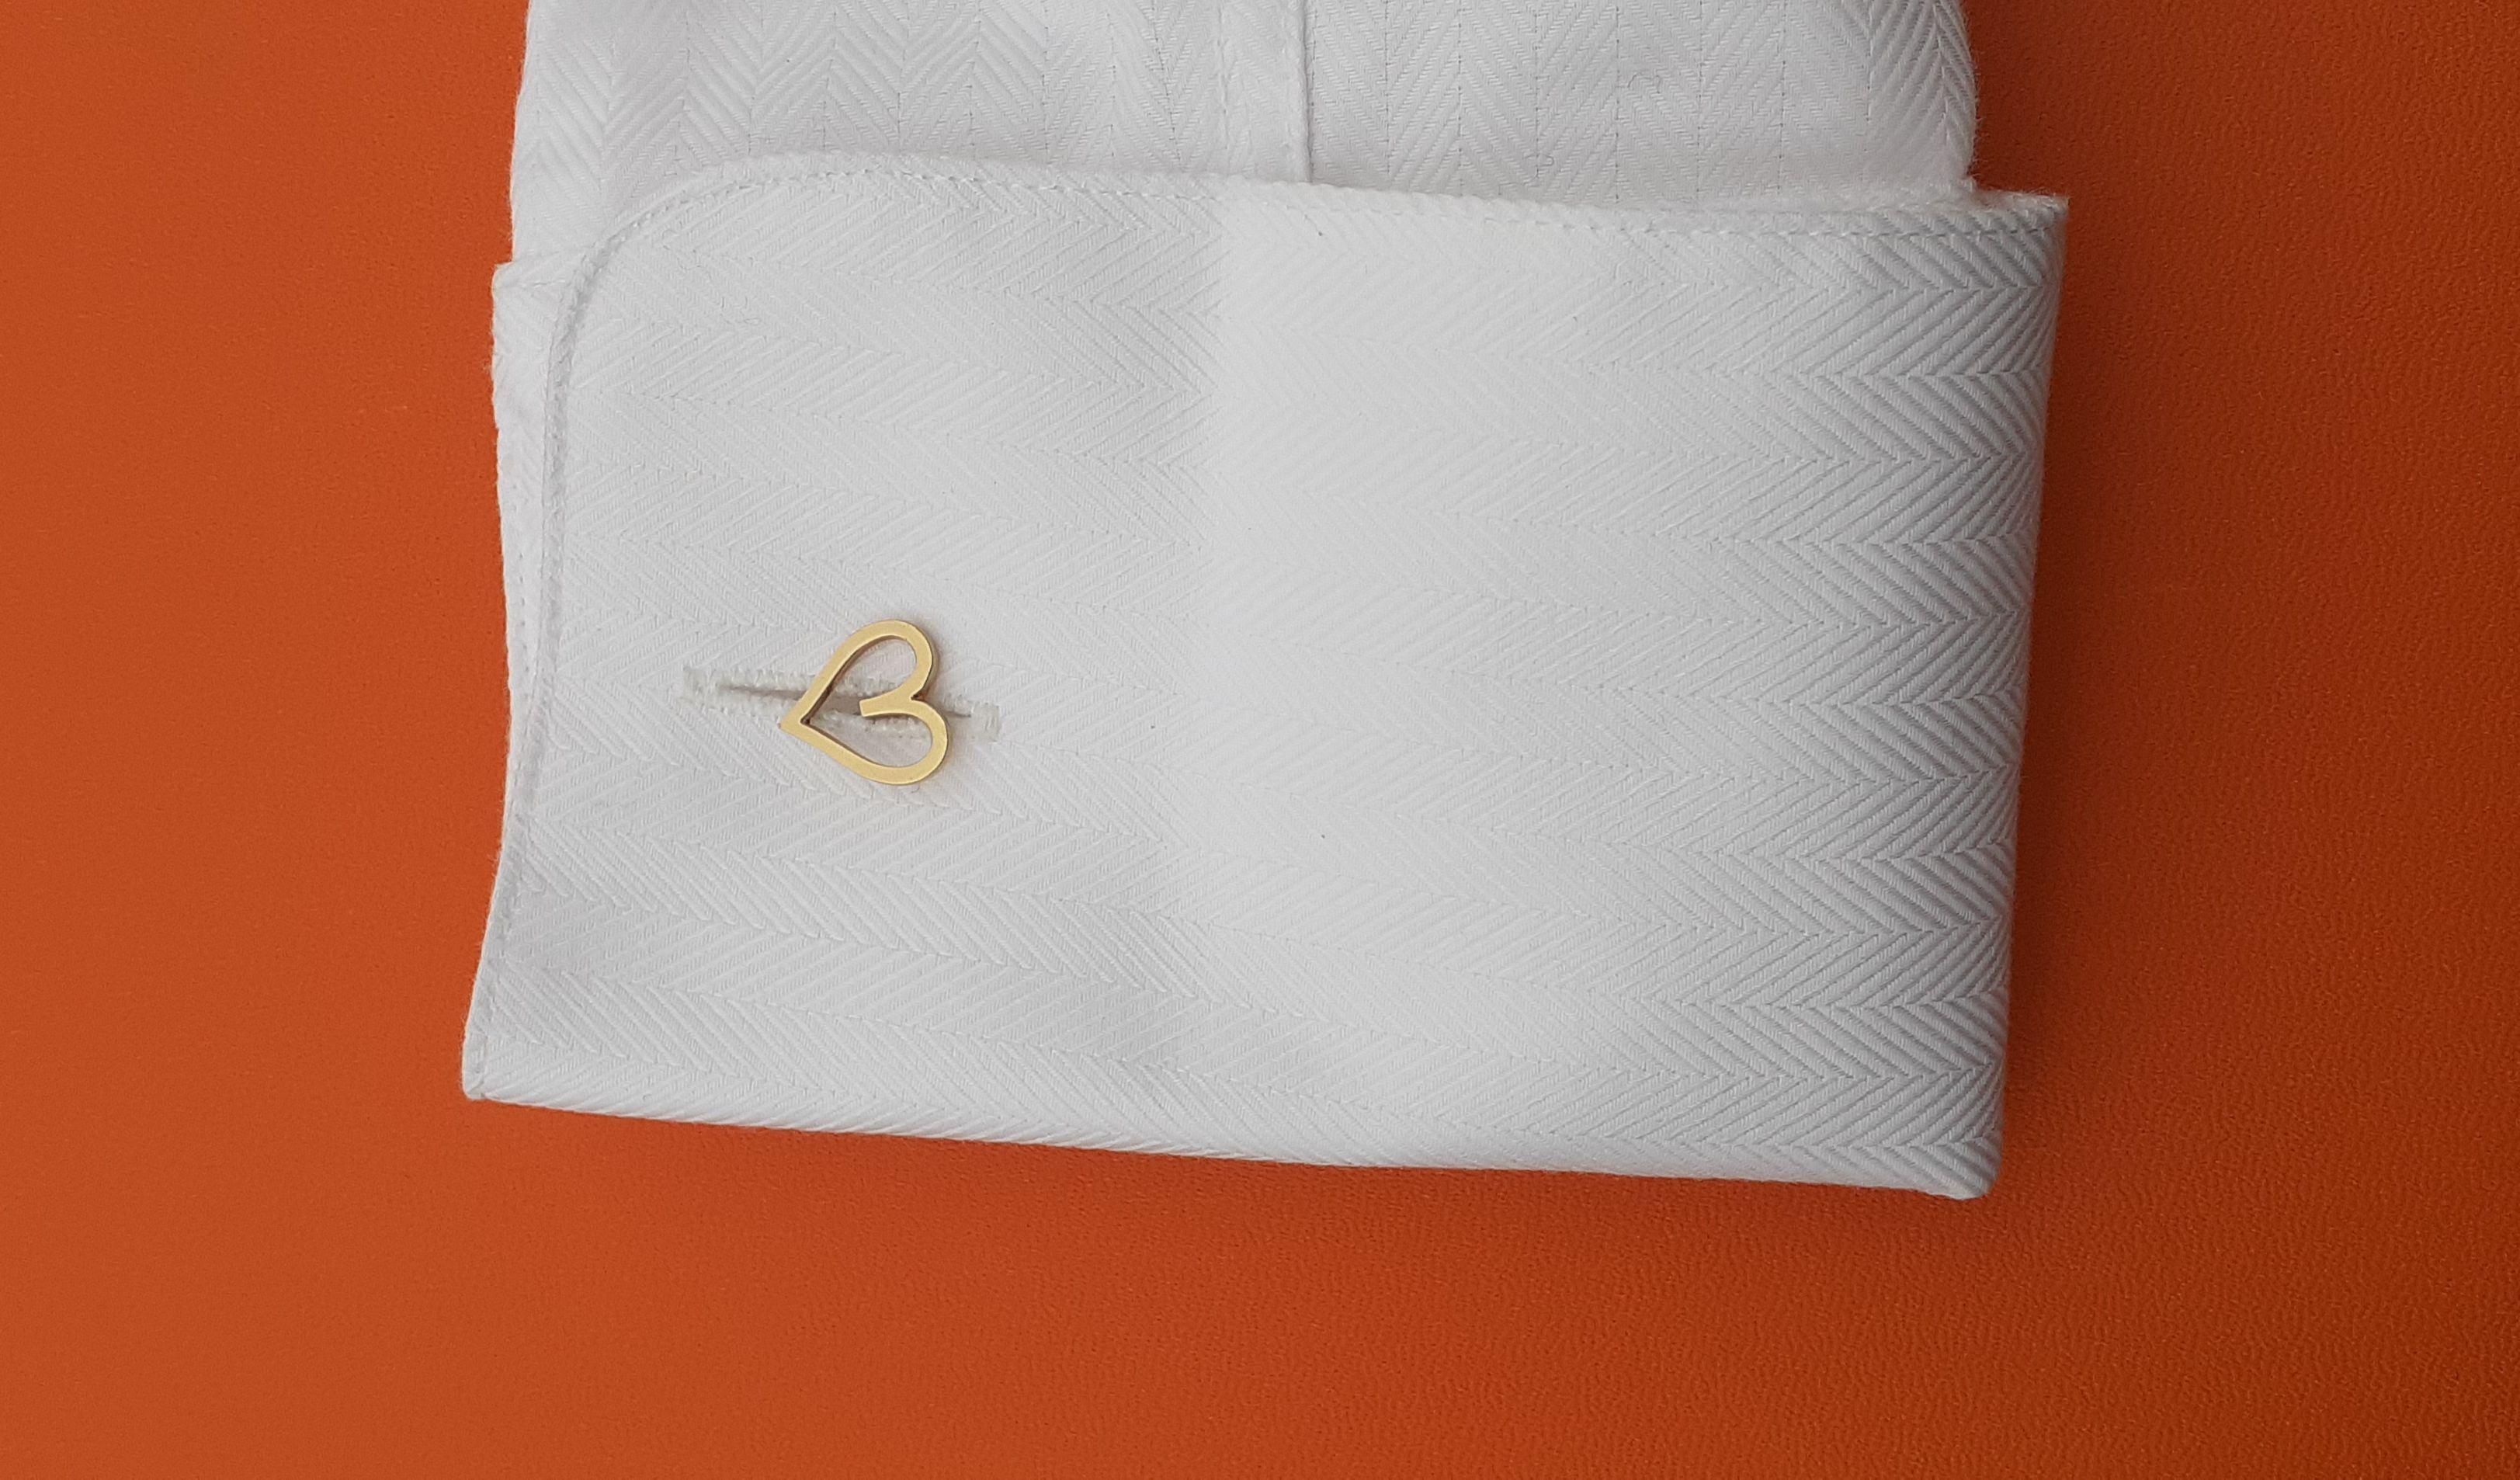 Exceptional Hermès Heart Shaped Cufflinks in Yellow Gold For Sale 5